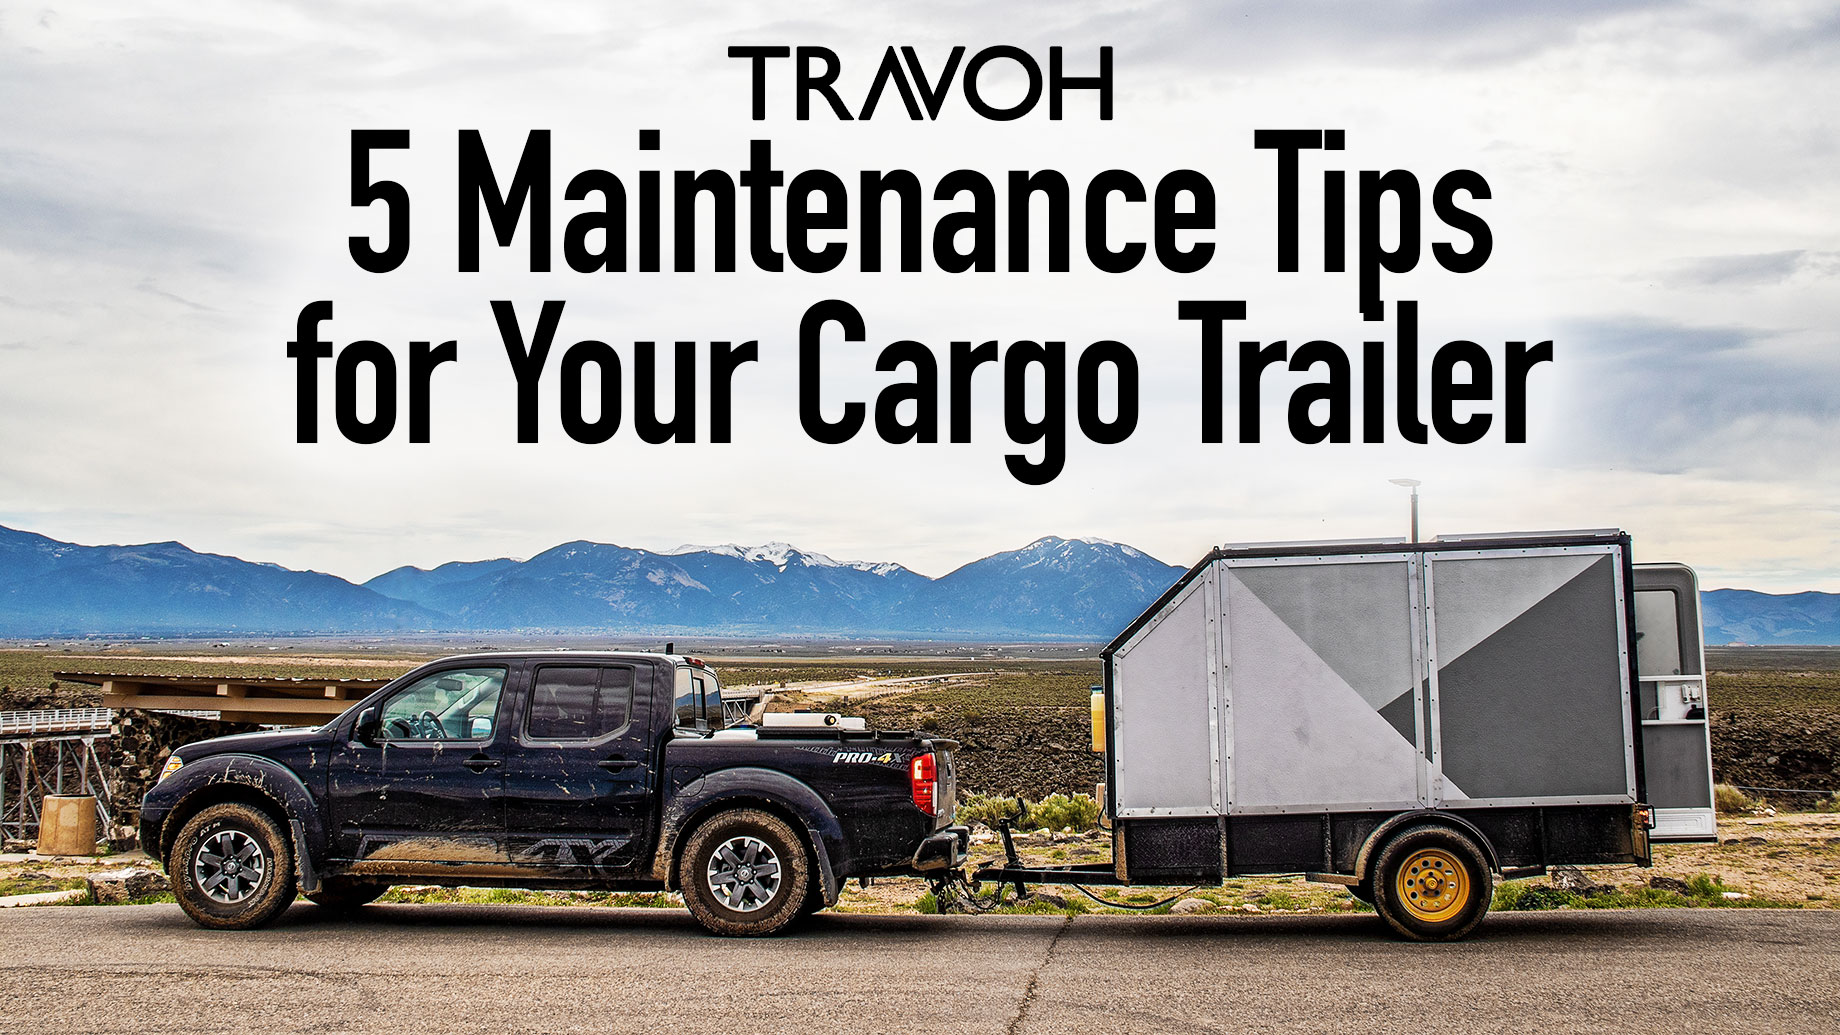 5 Maintenance Tips for Your Cargo Trailer